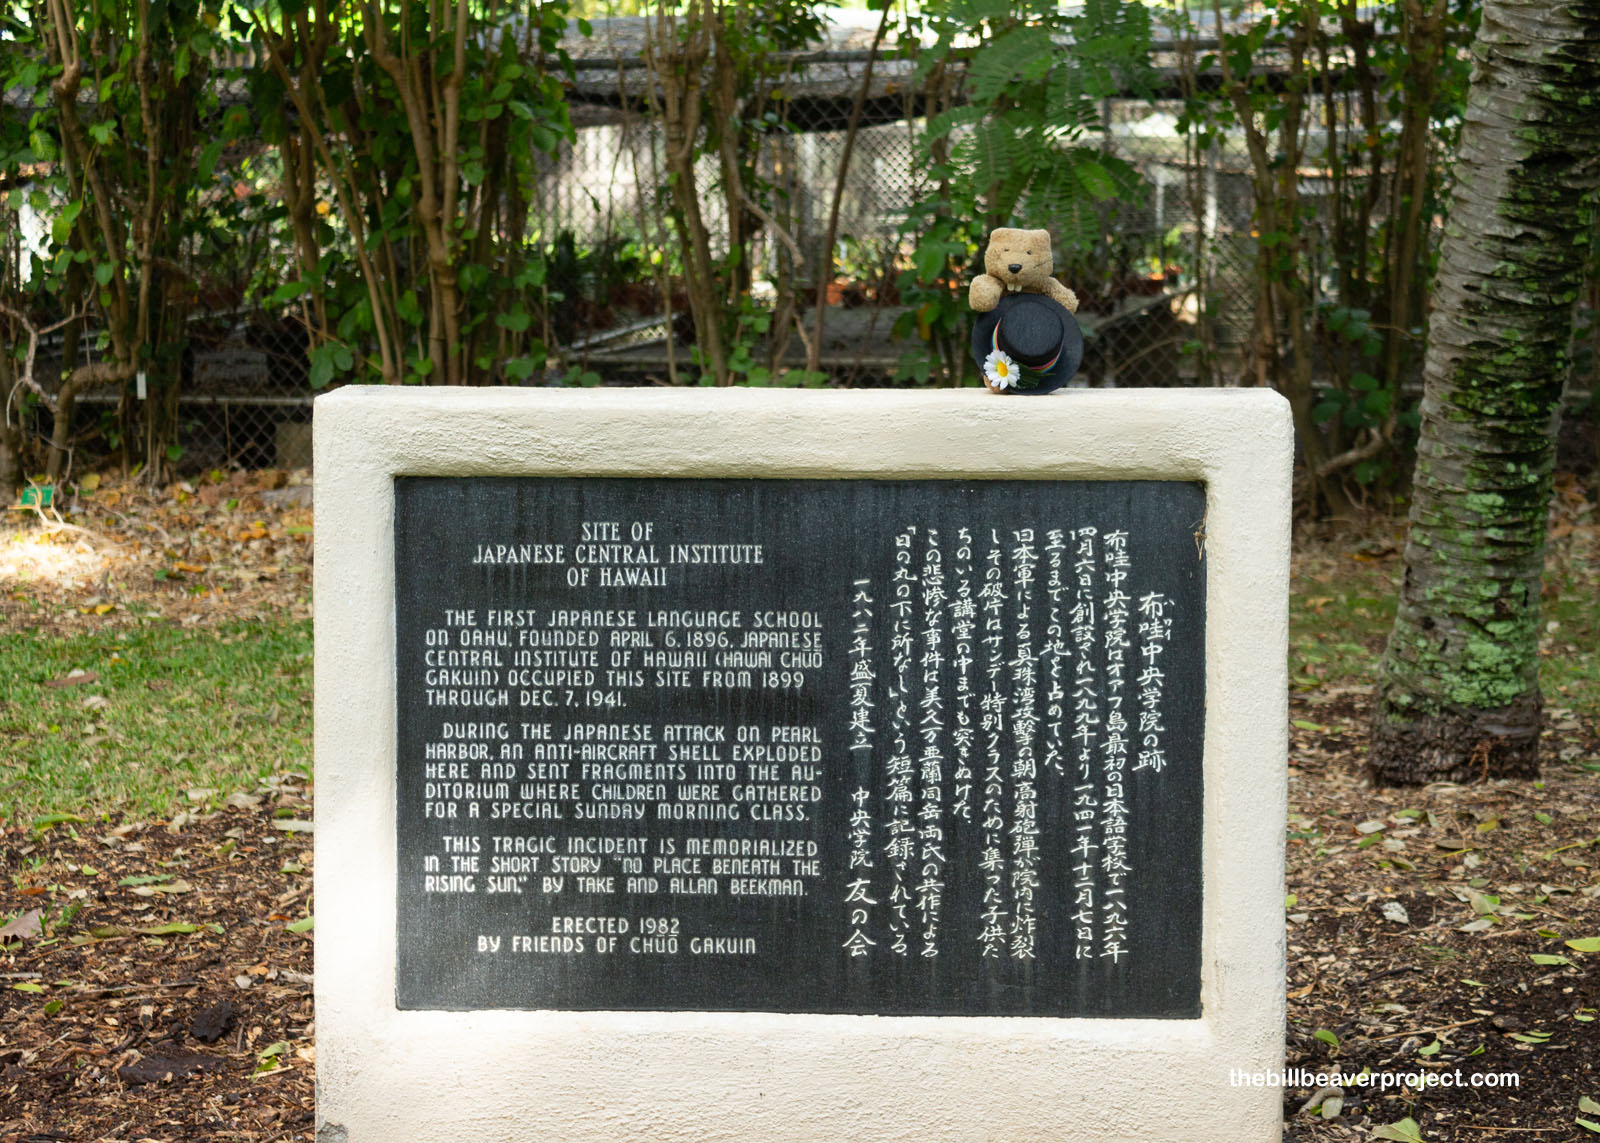 The site of Hawaiʻi's first Japanese language school!